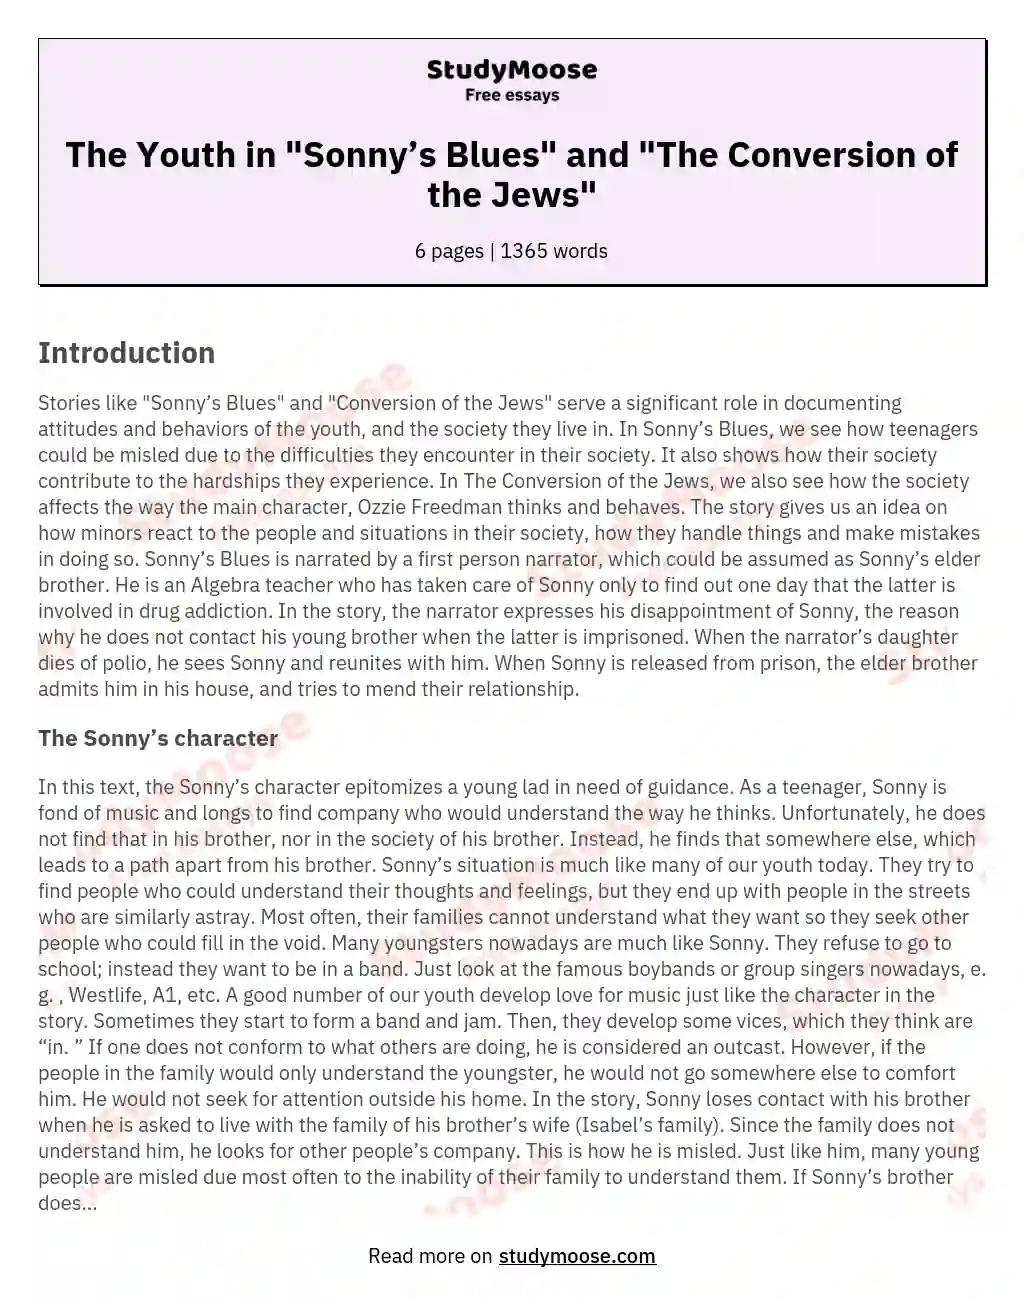 The Youth in "Sonny’s Blues" and "The Conversion of the Jews" essay